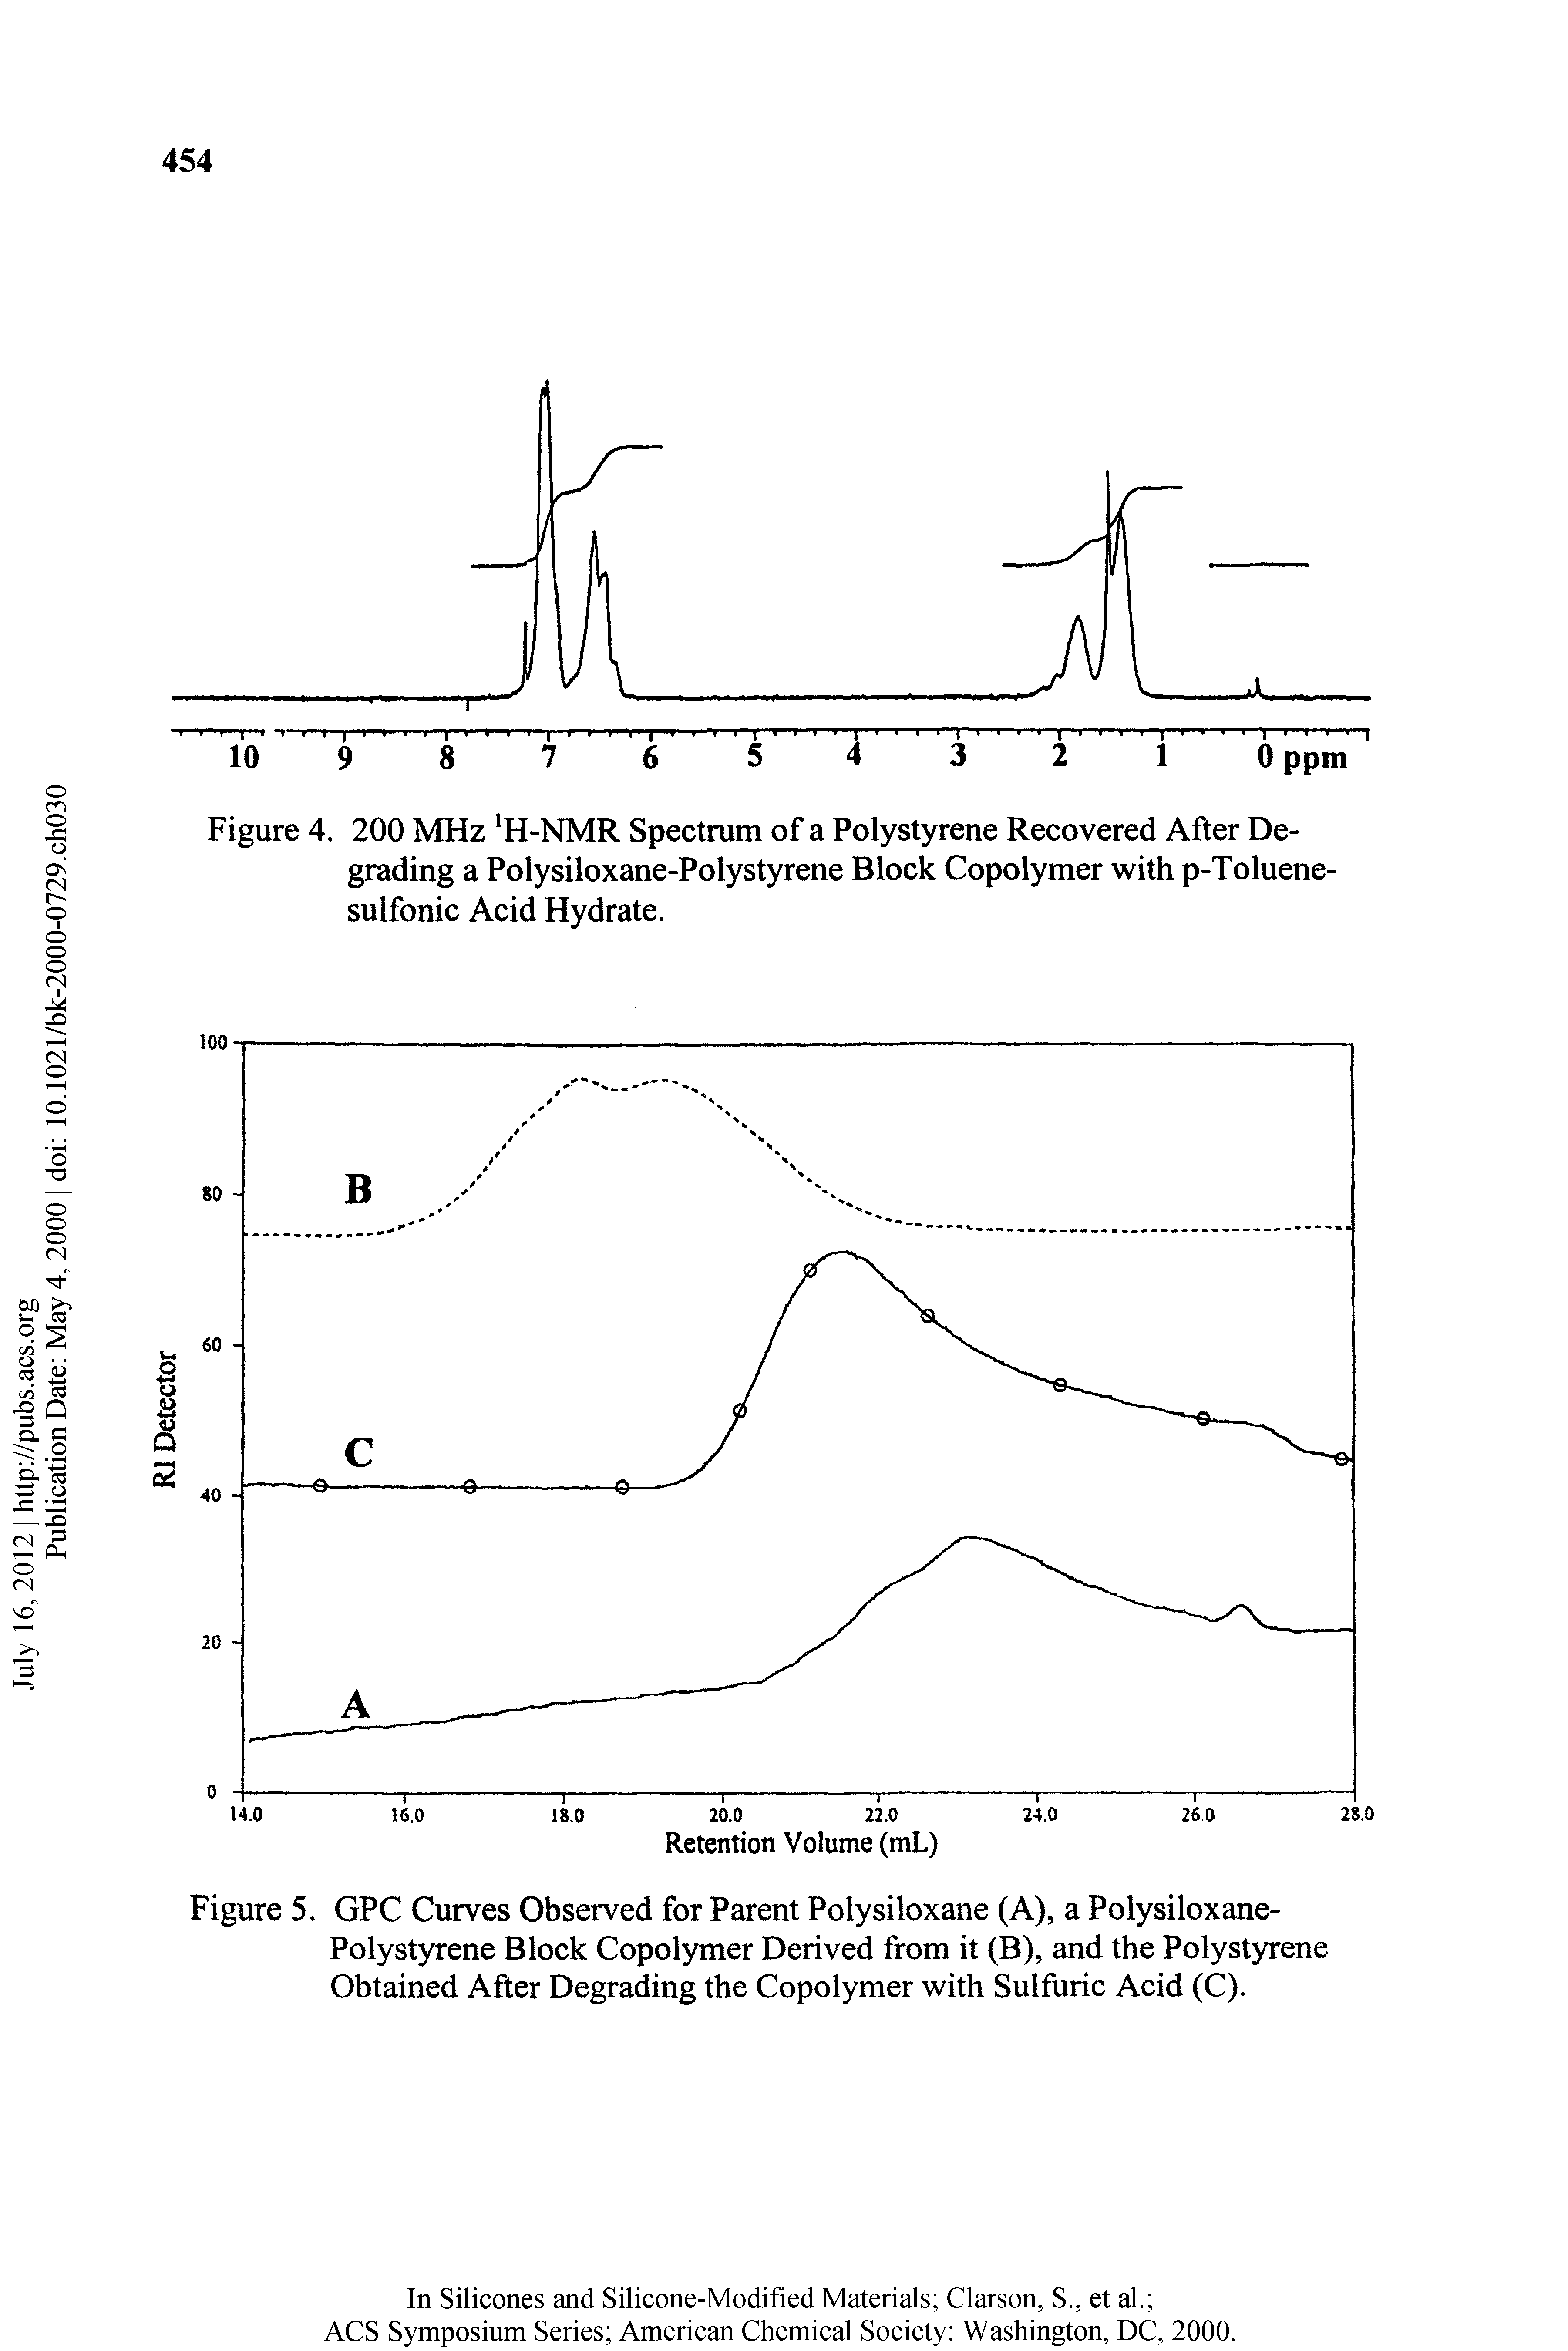 Figure 4. 200 MHz H-NMR Spectrum of a Polystyrene Recovered After Degrading a Polysiloxane-Polystyrene Block Copolymer with p-Toluene-sulfonic Acid Hydrate.